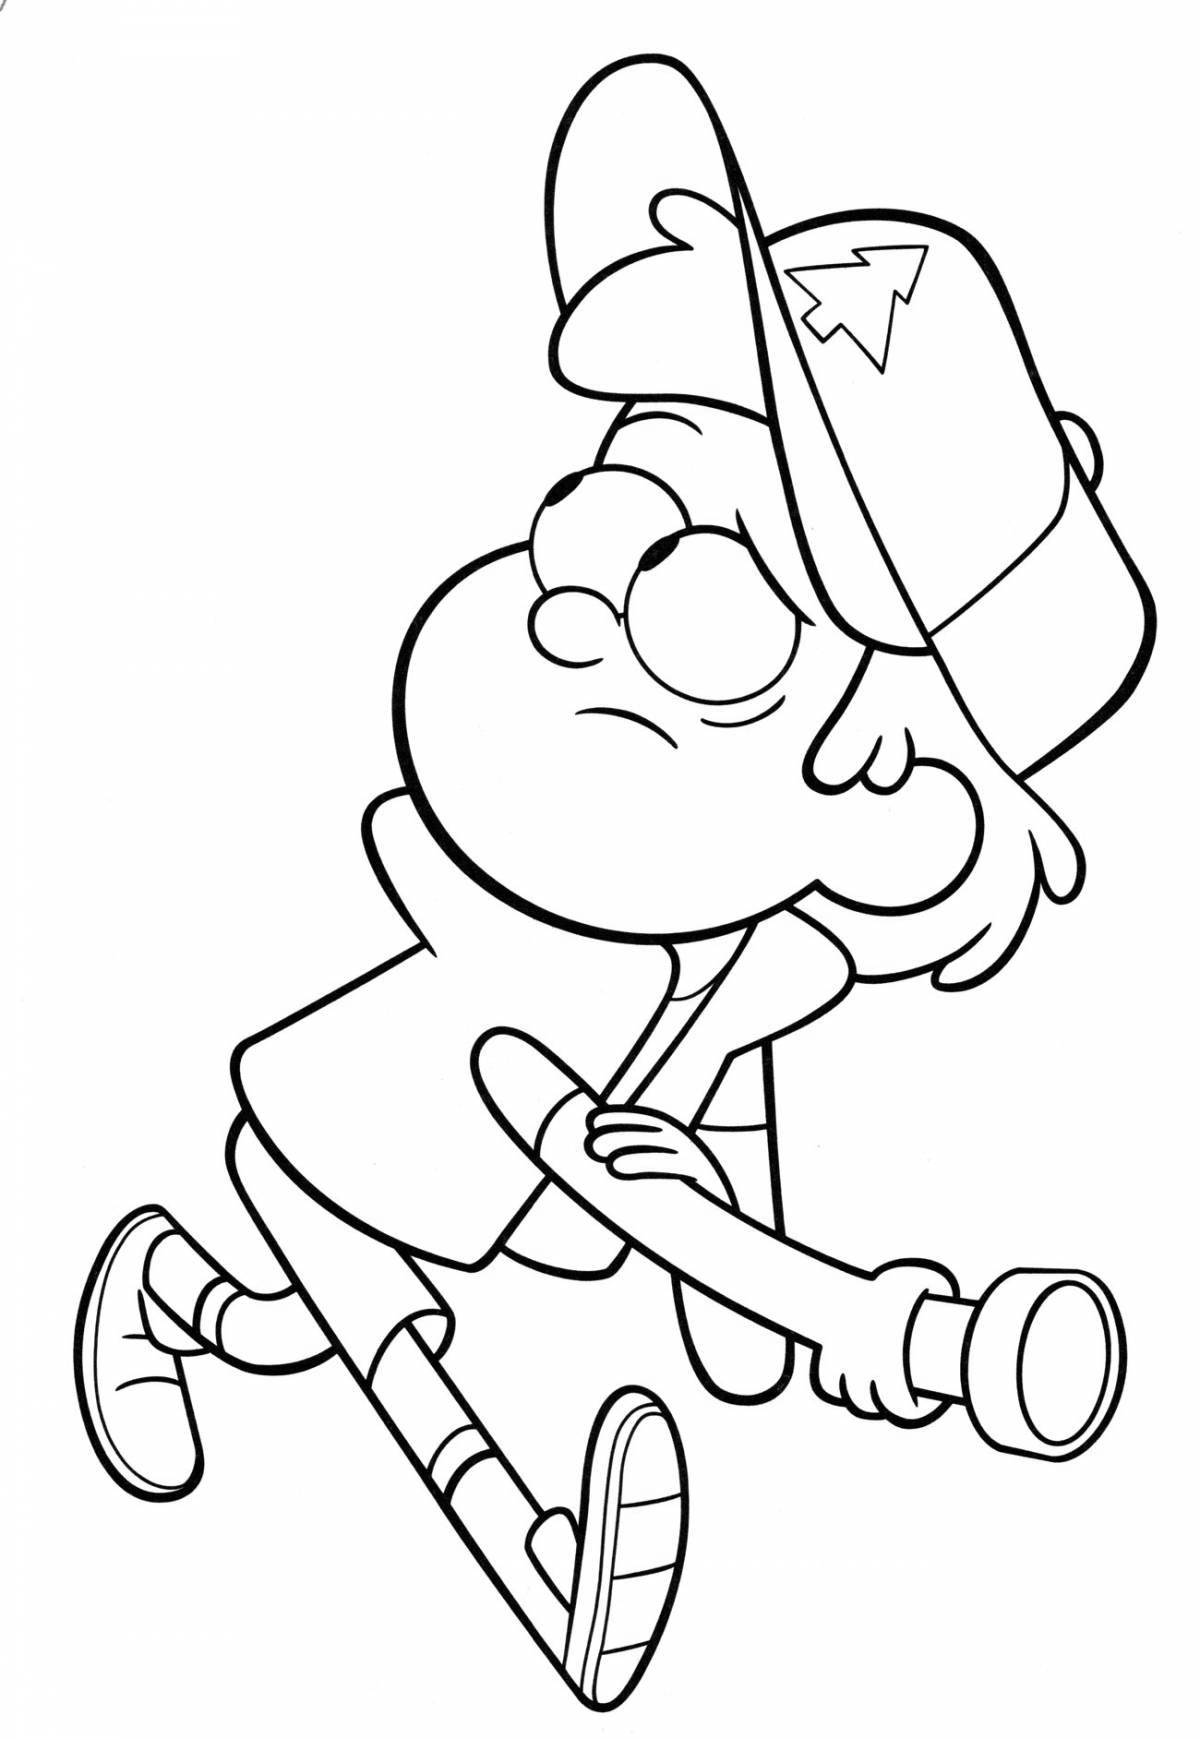 Character dipper gravity falls coloring page